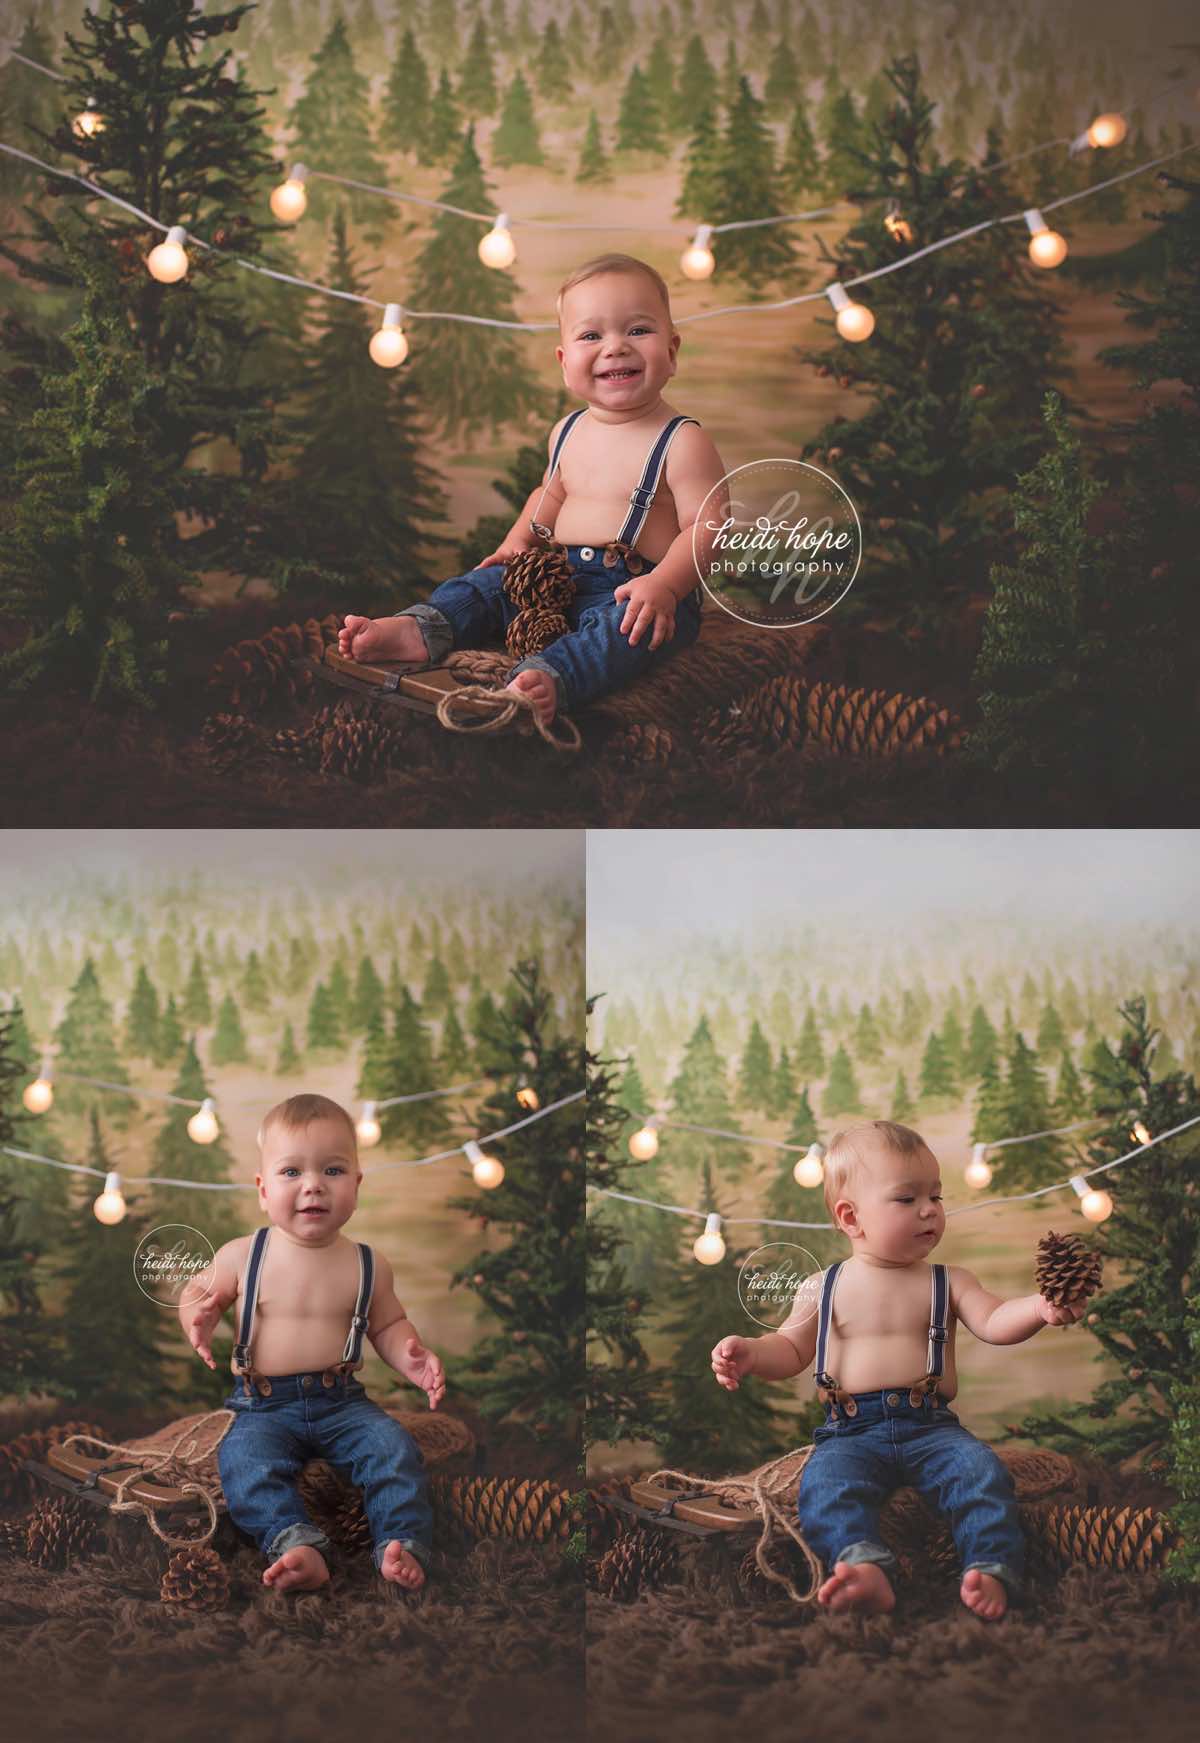 Photographer Rising » A sneak peek of our Winter 2016 Rustic Pine backdrop for photographers ...